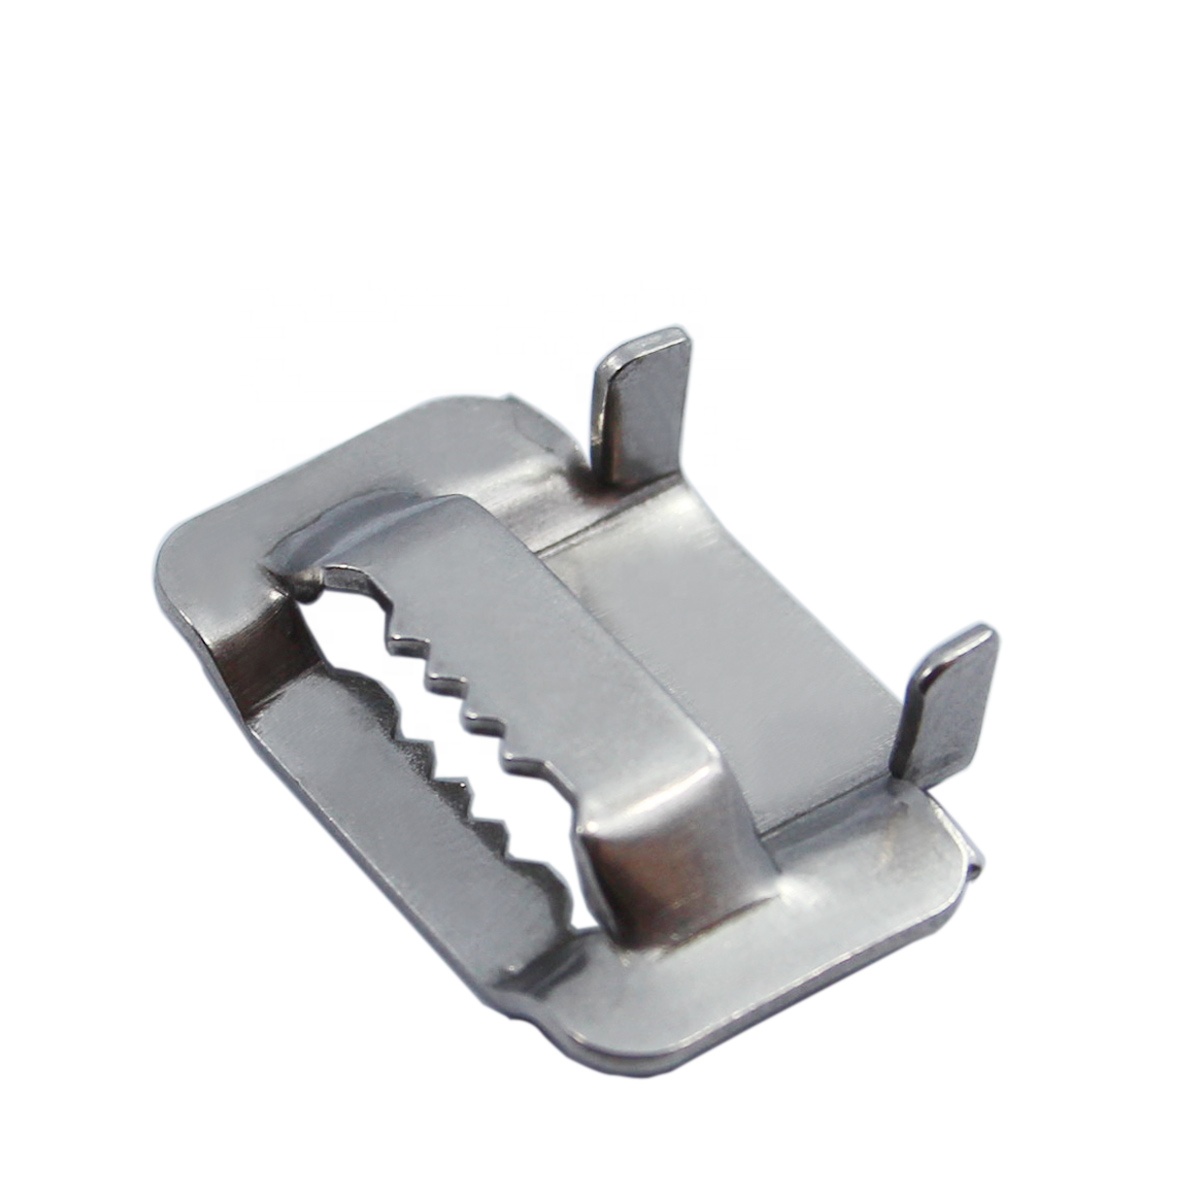 First steel band-it strap buckle 304 stainless steel 316 20 mm buckle customised